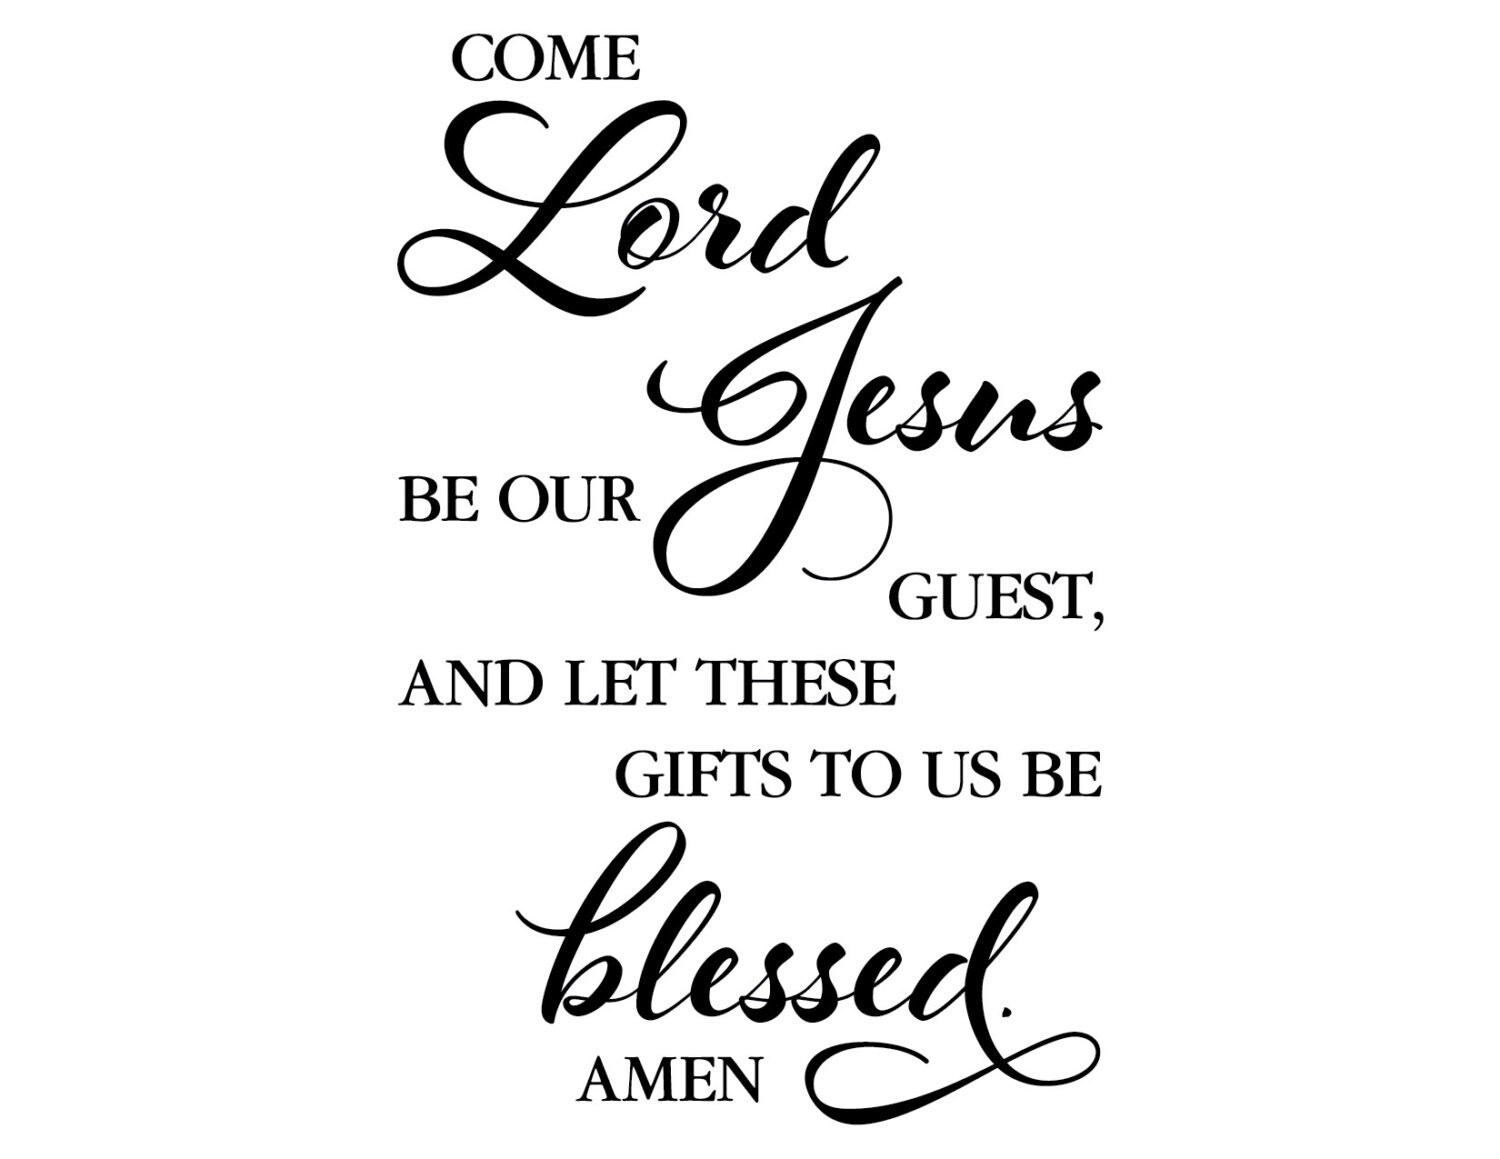 Come Lord Jesus be our guest and let these gifts to us be